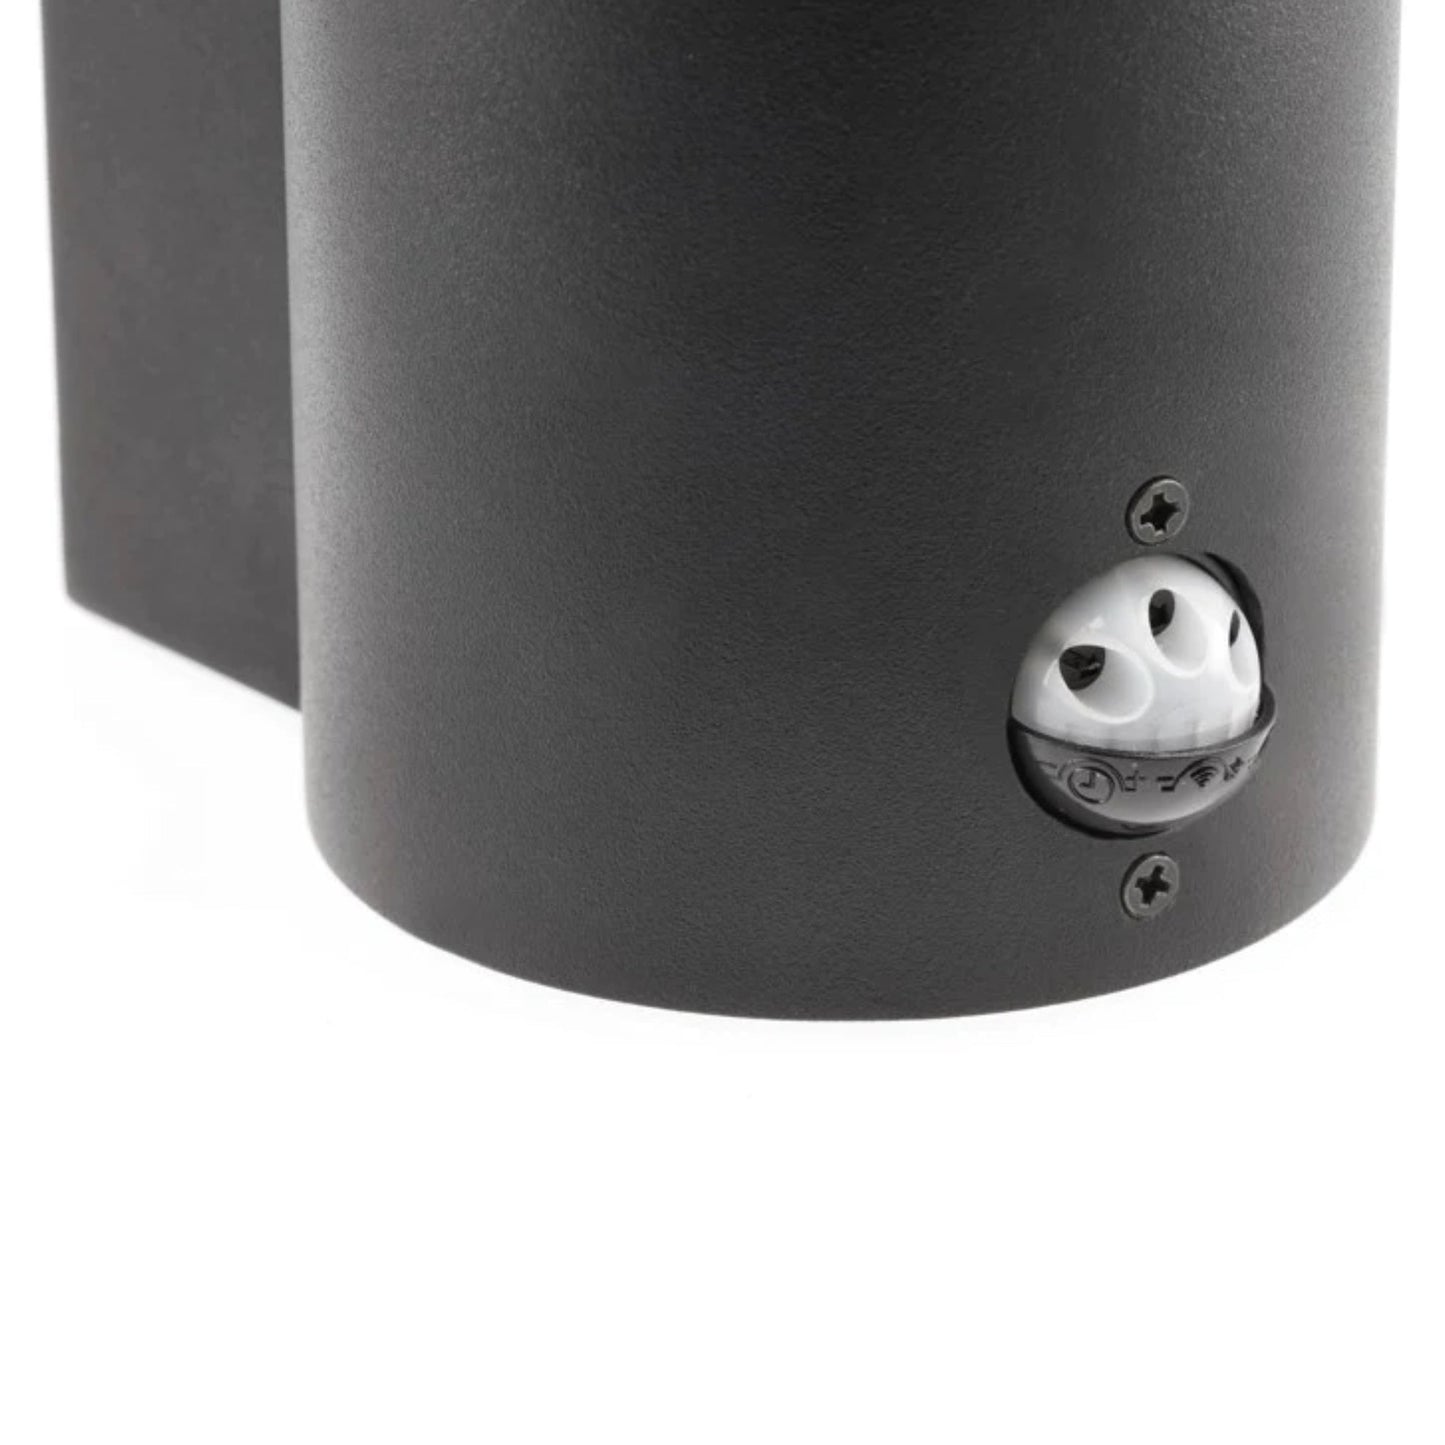 Explore our black cylinder wall light today, fit with a smoky diffuser and motion sensor features! If you require a valuable lighting system and an additional layer of security for your home’s outdoor space, then this lighting body can provide the right protection and style for you. 